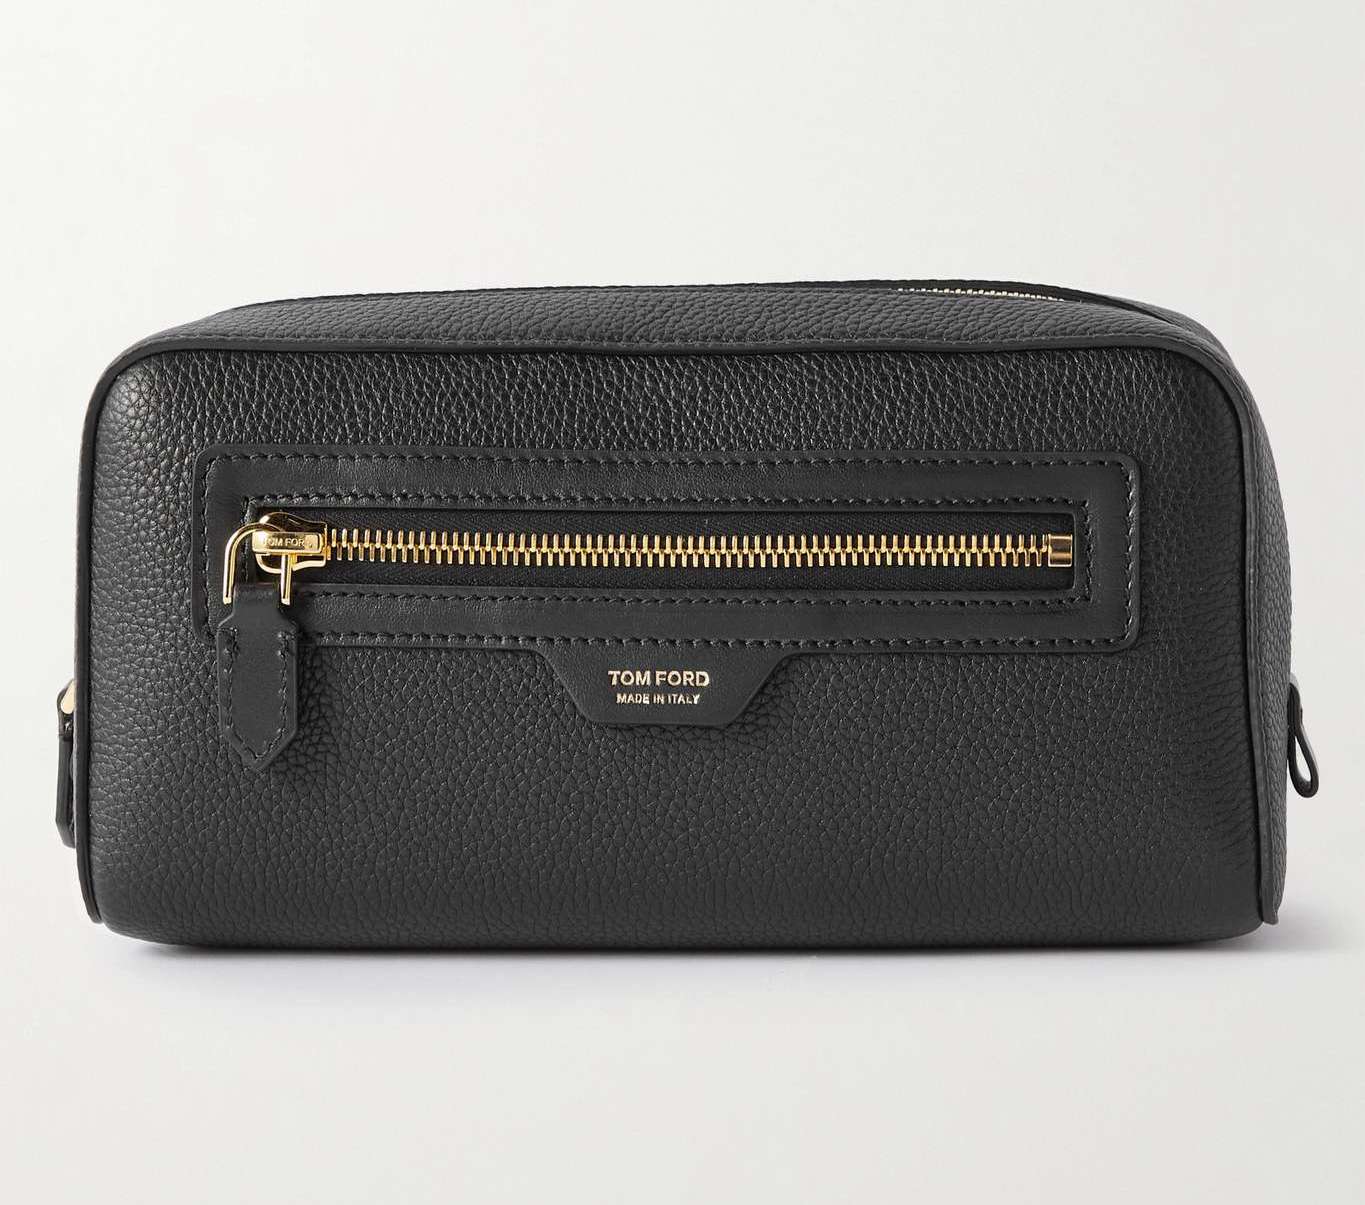 image of a black leather Tom Ford wash bag for men with a zipper and logo tab